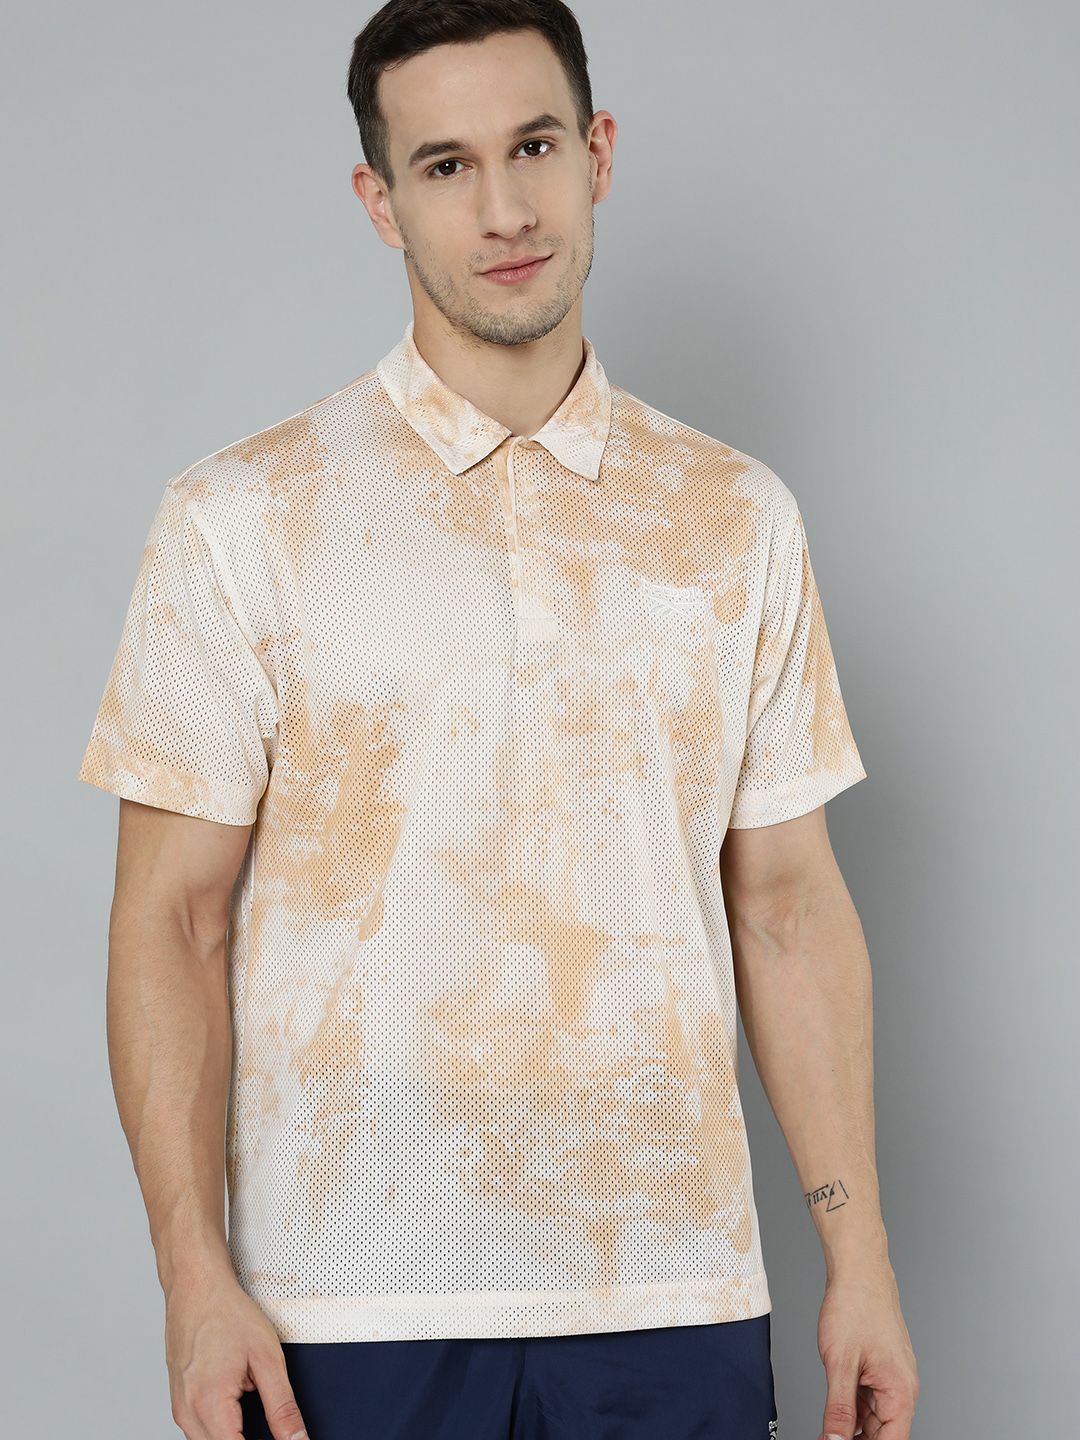 Reebok Classic Unisex Beige Classics Mesh Allover Tie and Dye Print Polo Collar T-shirt Price in India